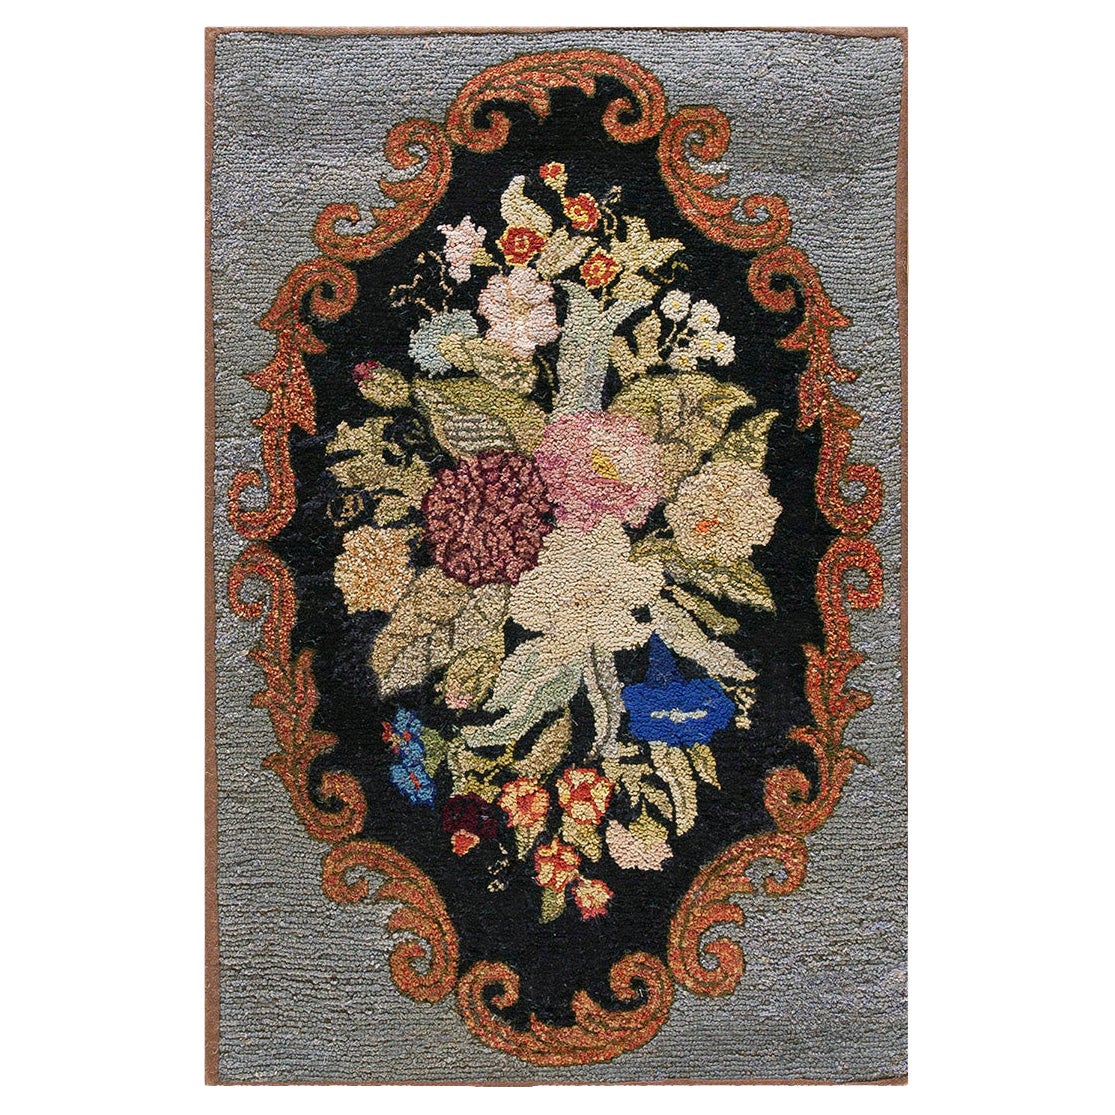 Early 20th Century American Hooked Rug ( 2' x 3' - 62 x 92 ) For Sale